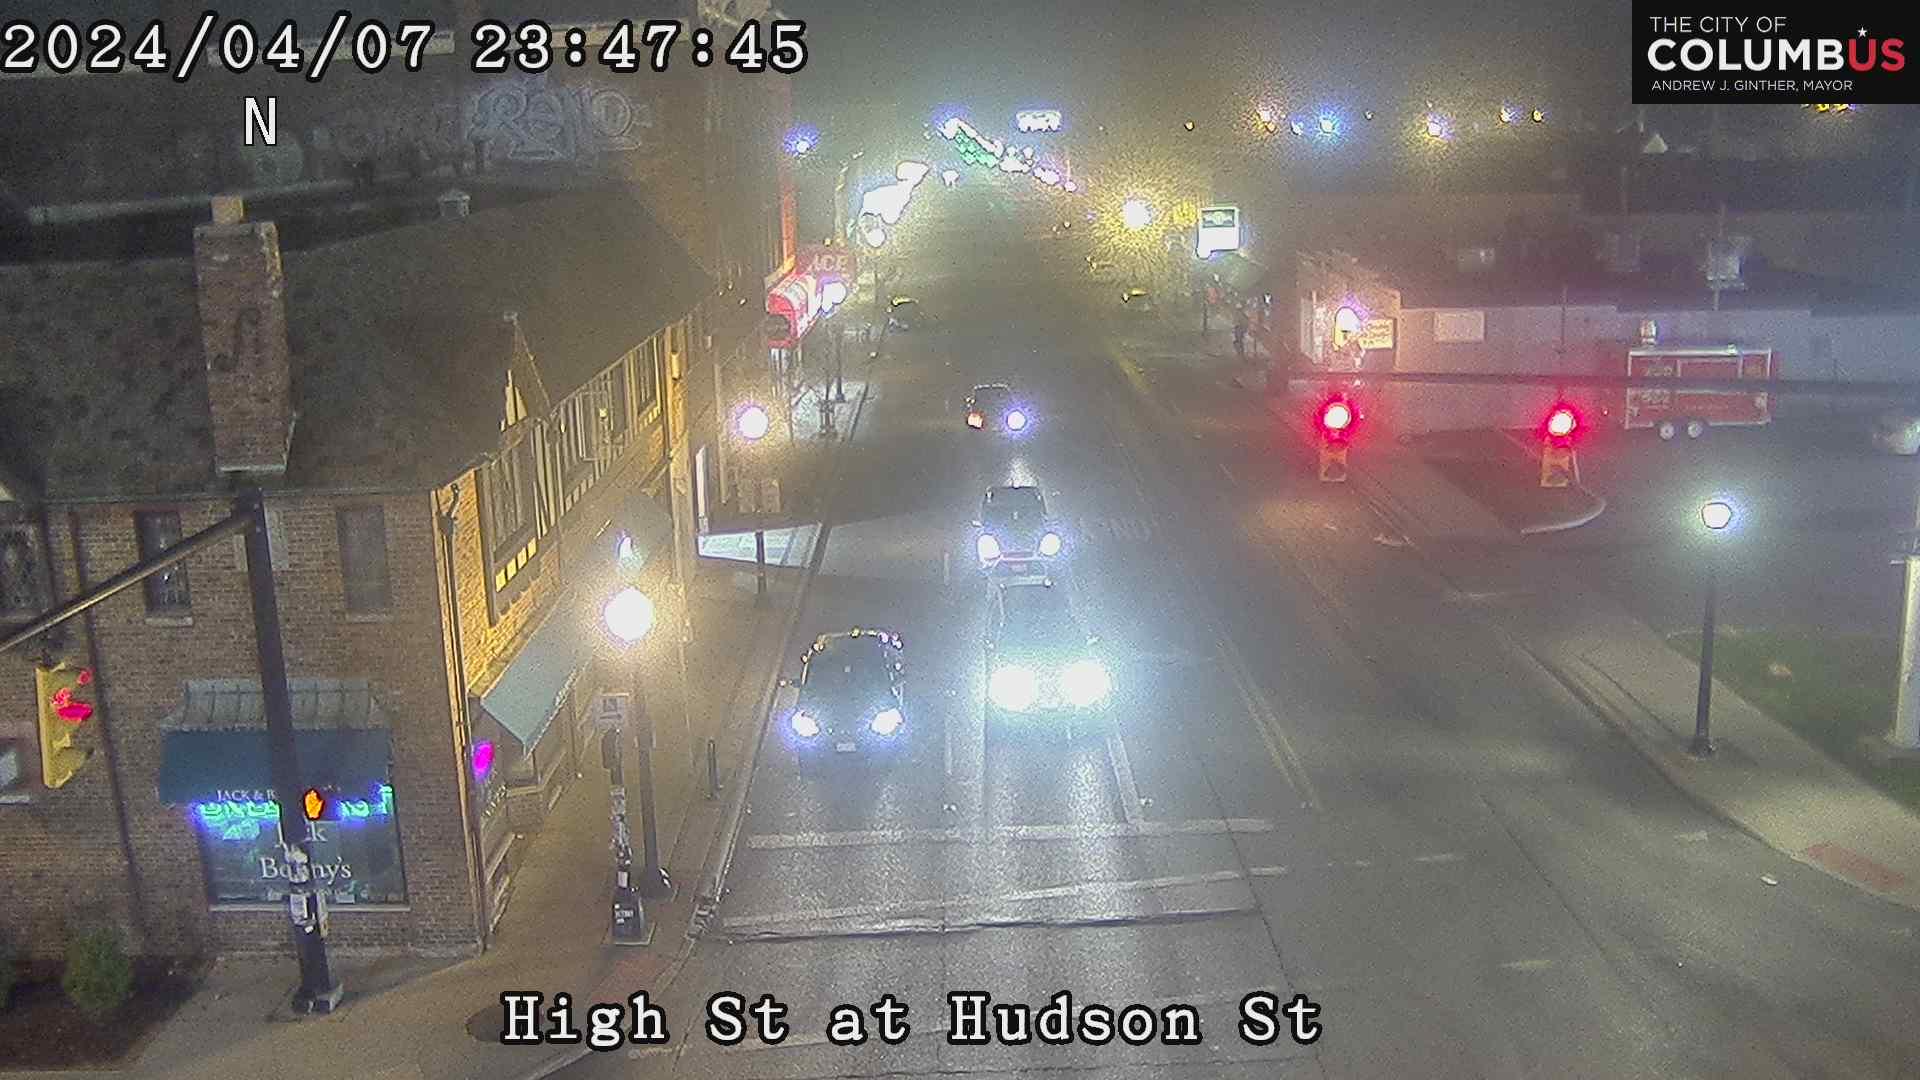 Traffic Cam University District District 2: City of Columbus) High St at Hudson St Player